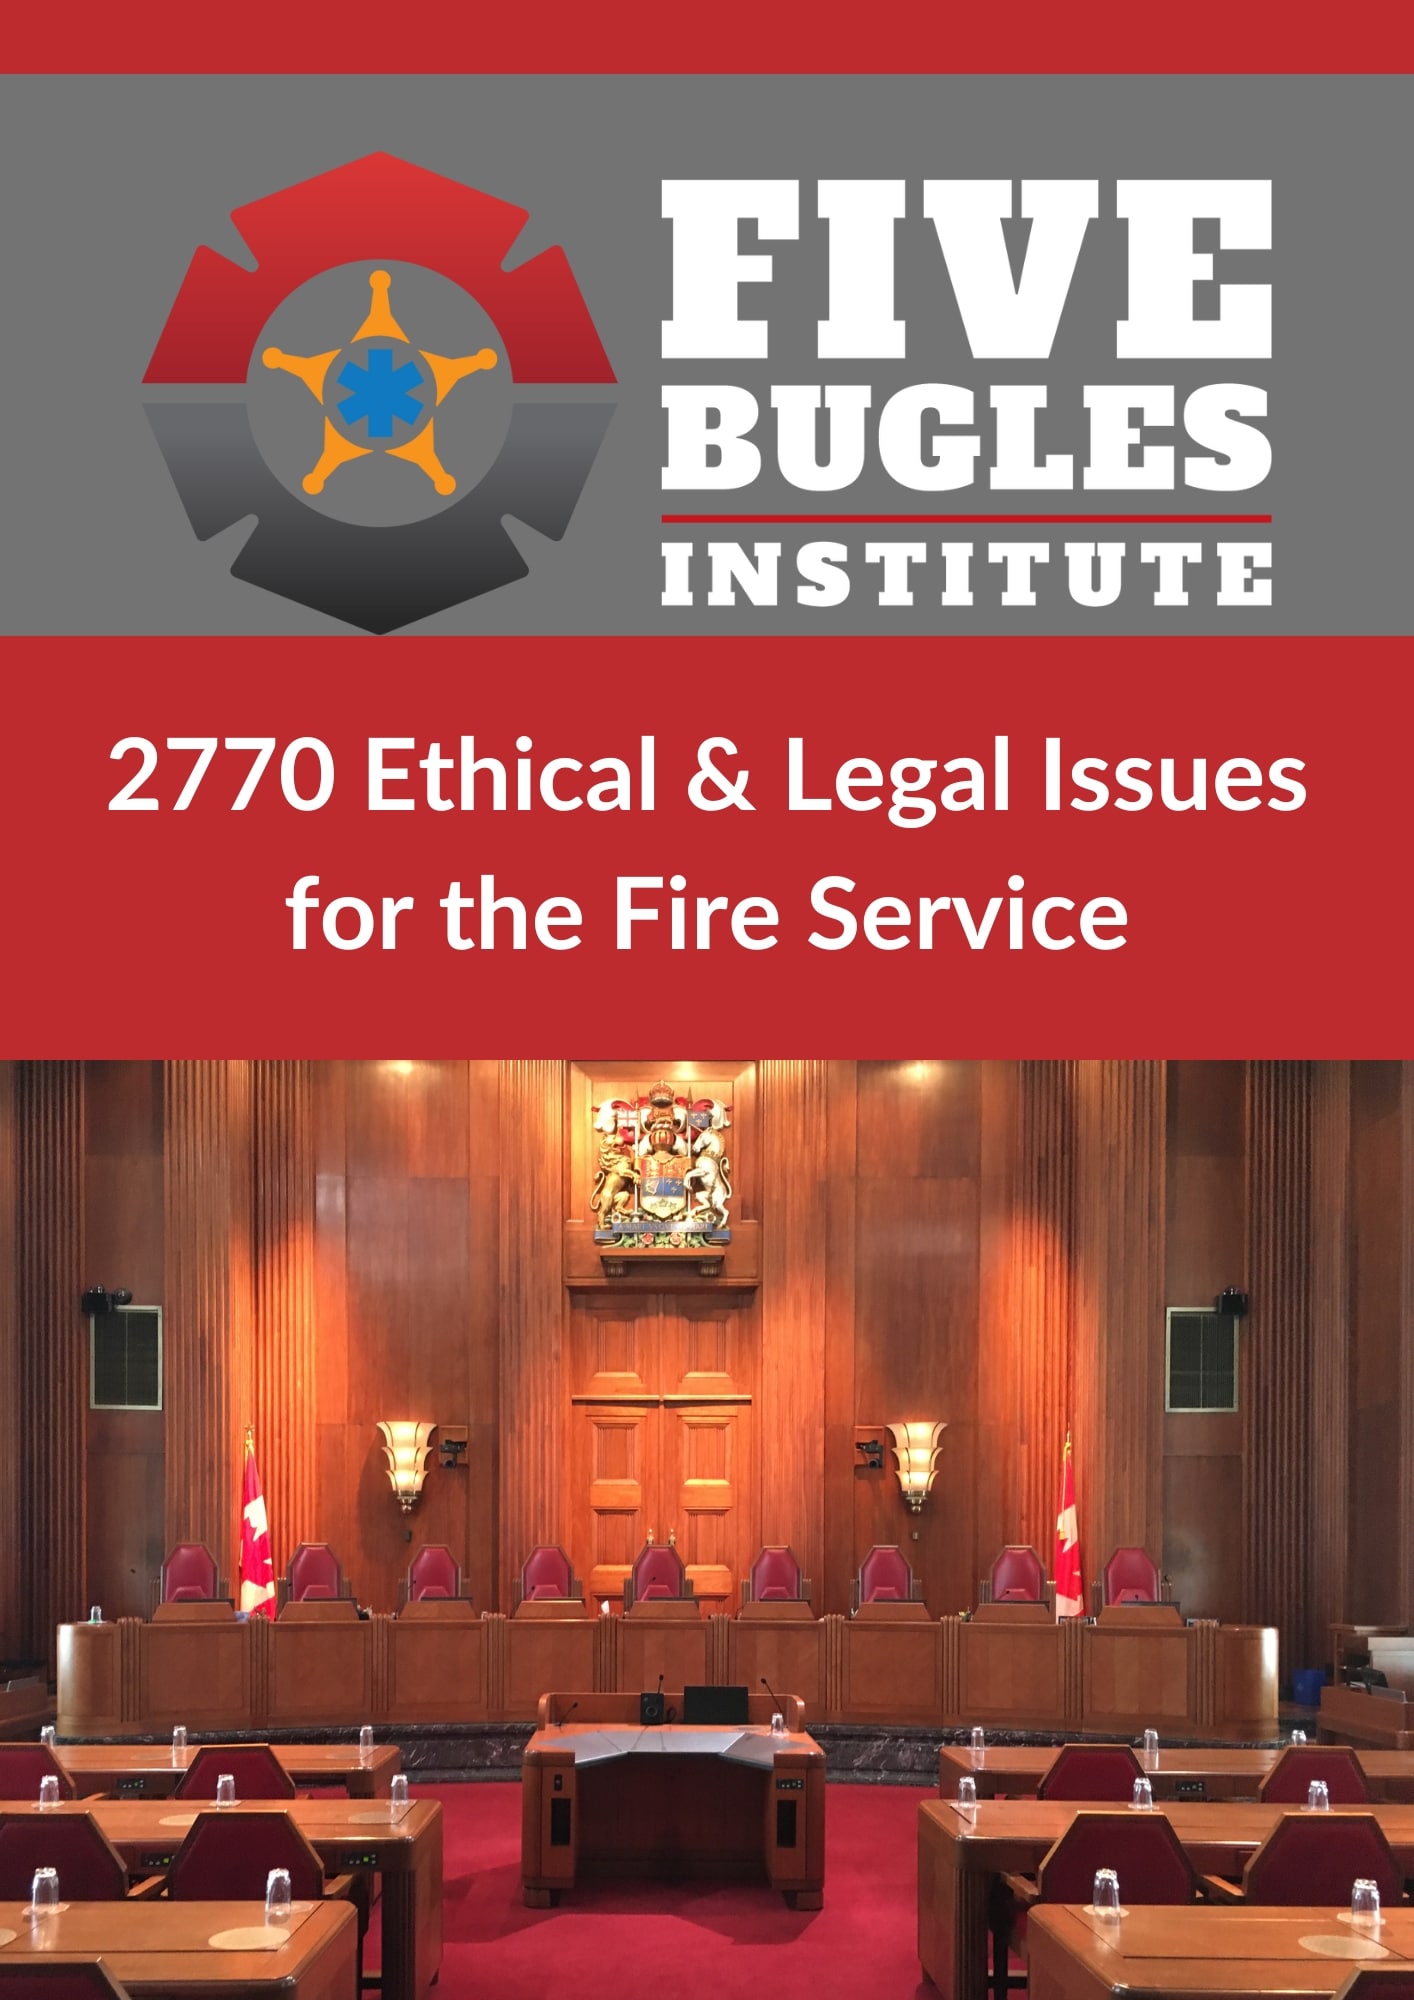 2770 Ethical & Legal Issues for the Fire Service 0.1 (1)